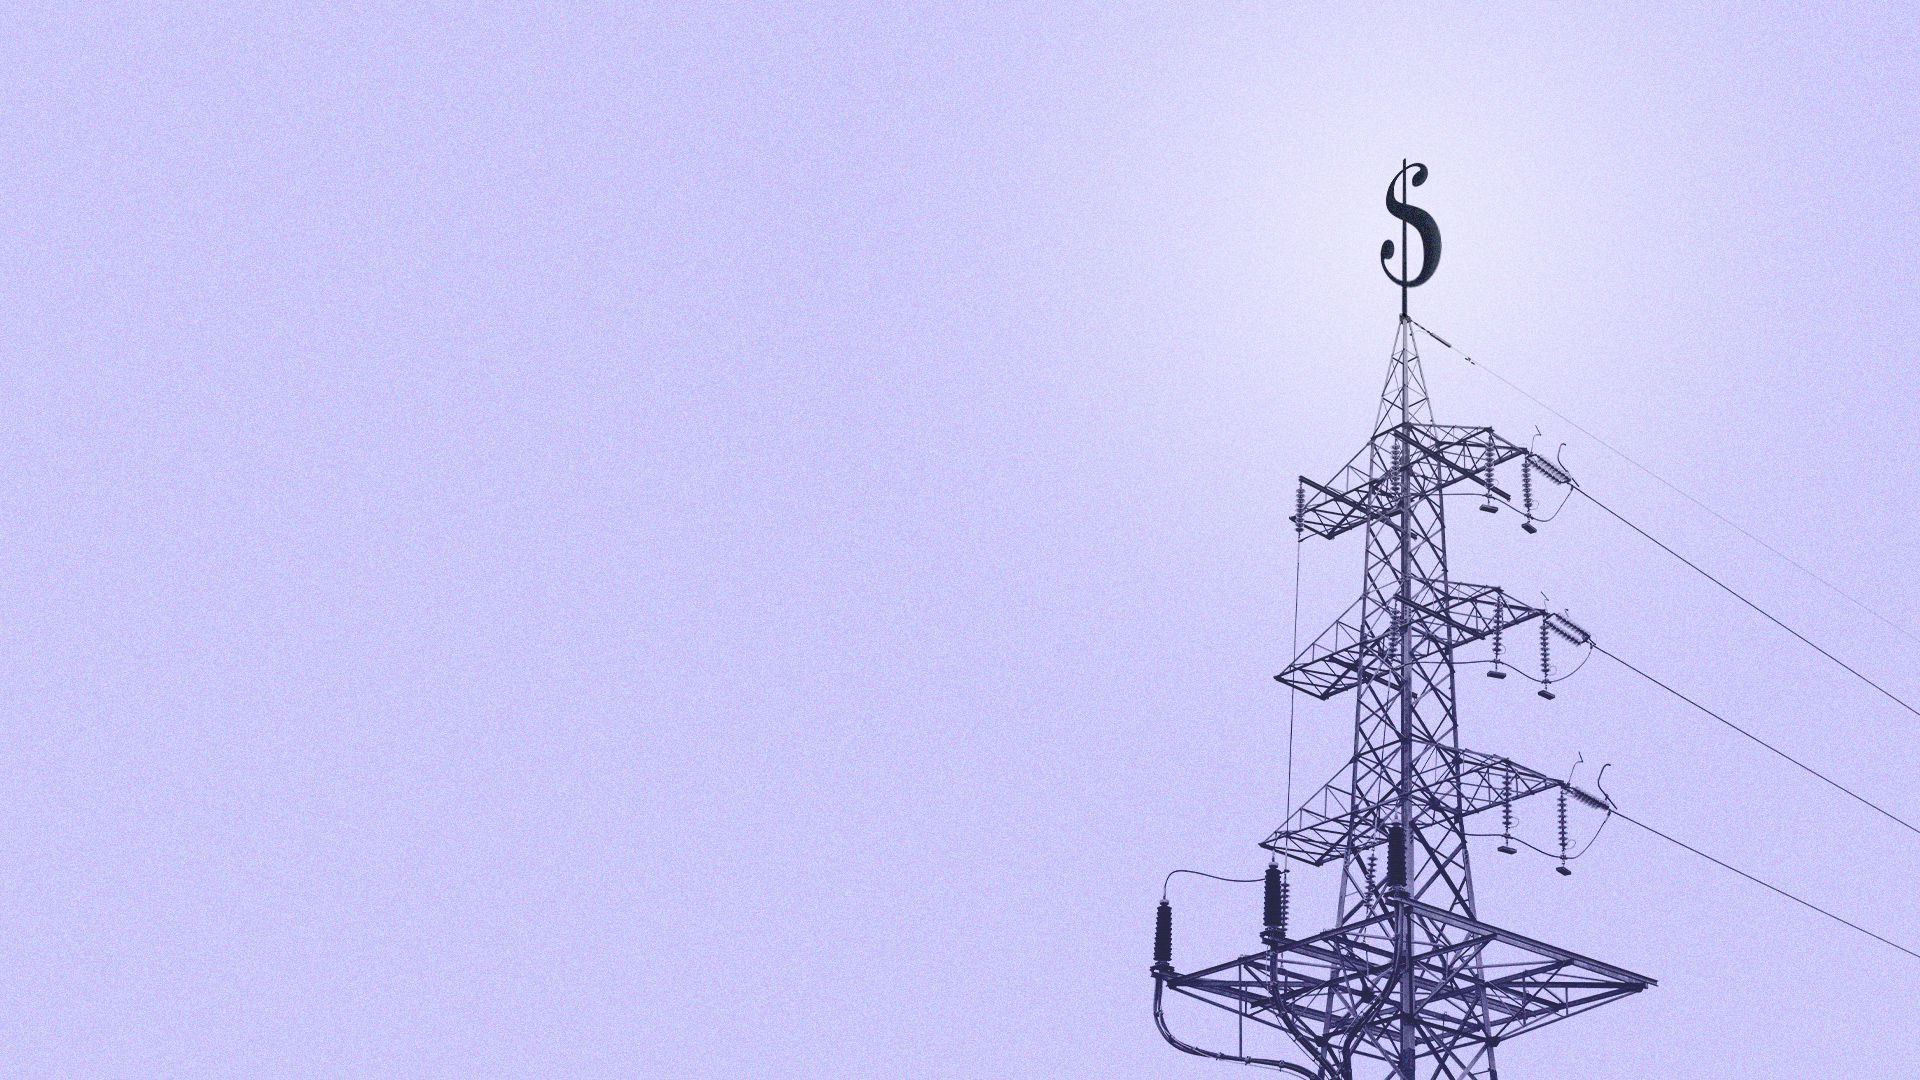 Illustration of an electricity pylon with a dollar sign at the top.